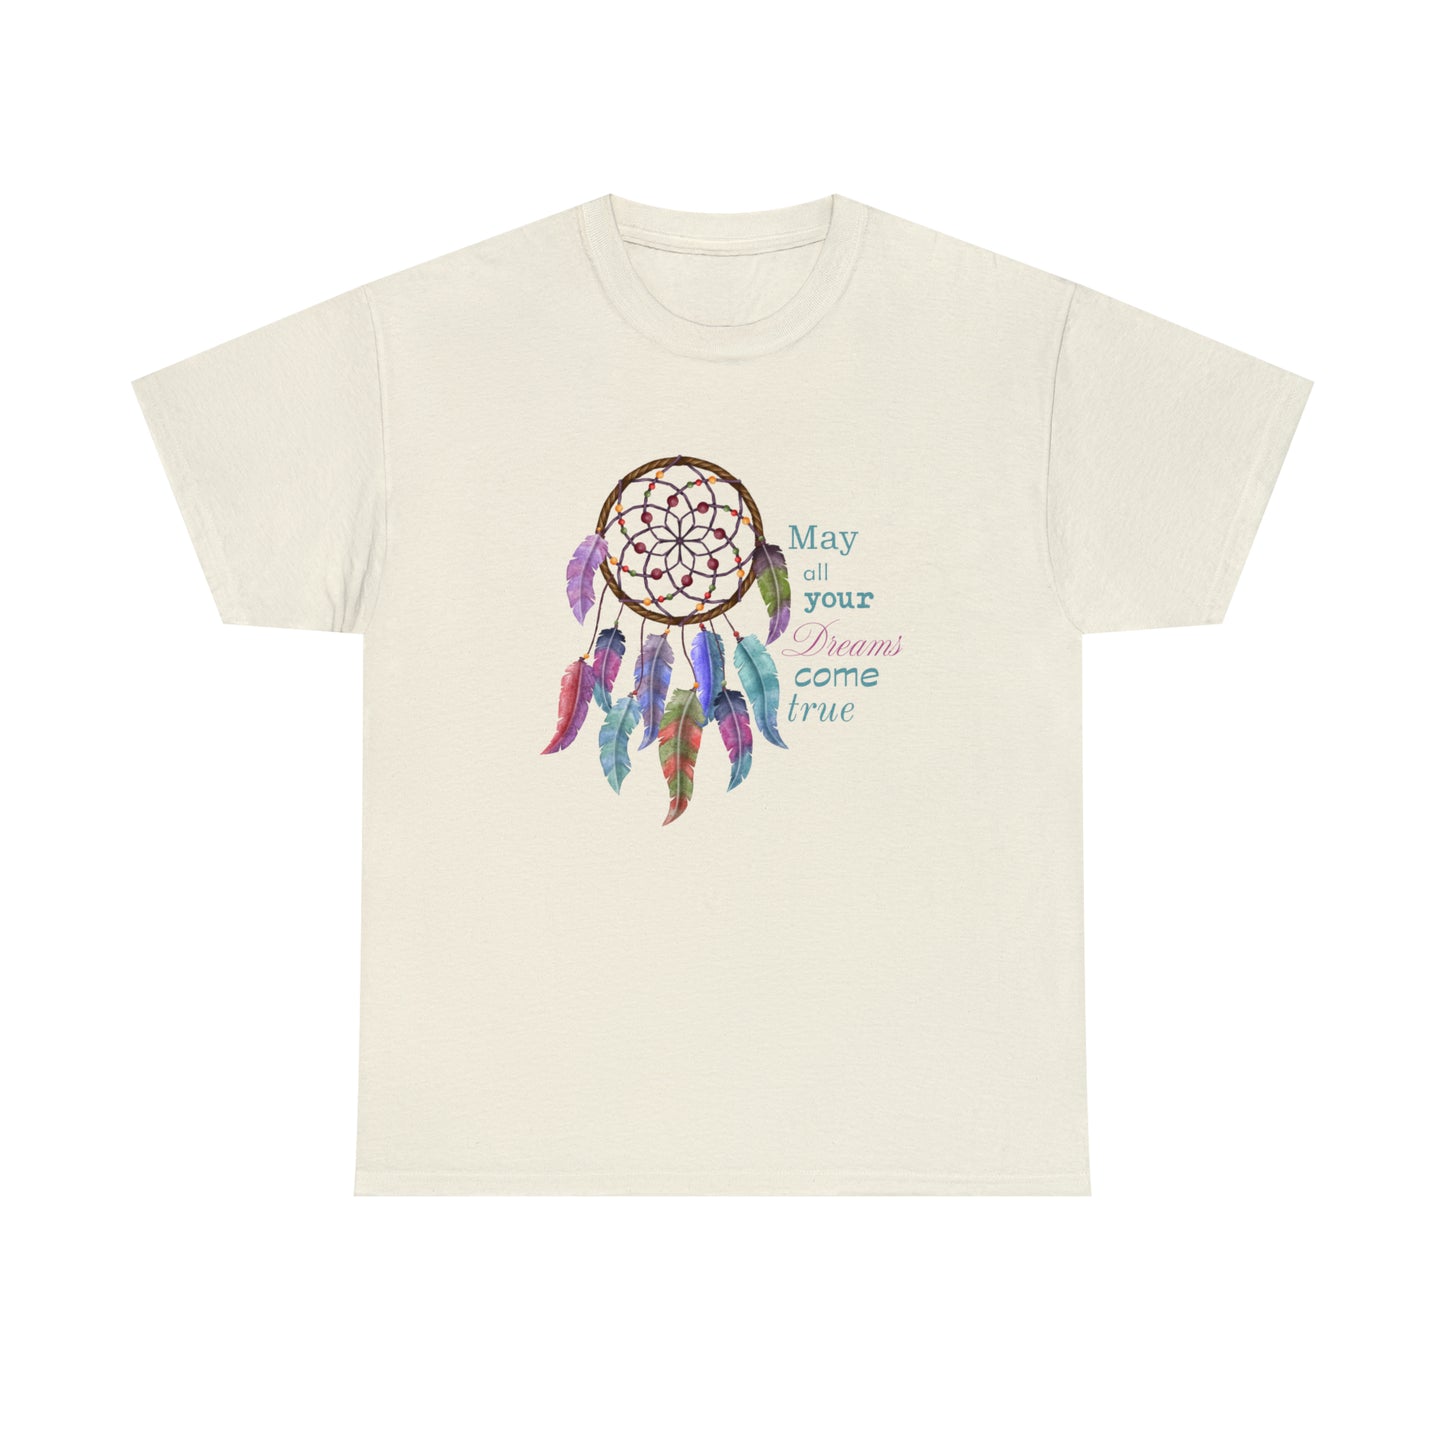 Dreamcatcher T-Shirt For May All Your Dreams Come True TShirt For Motivational T Shirt For Positive Shirt For Spiritual Shirt For Woman